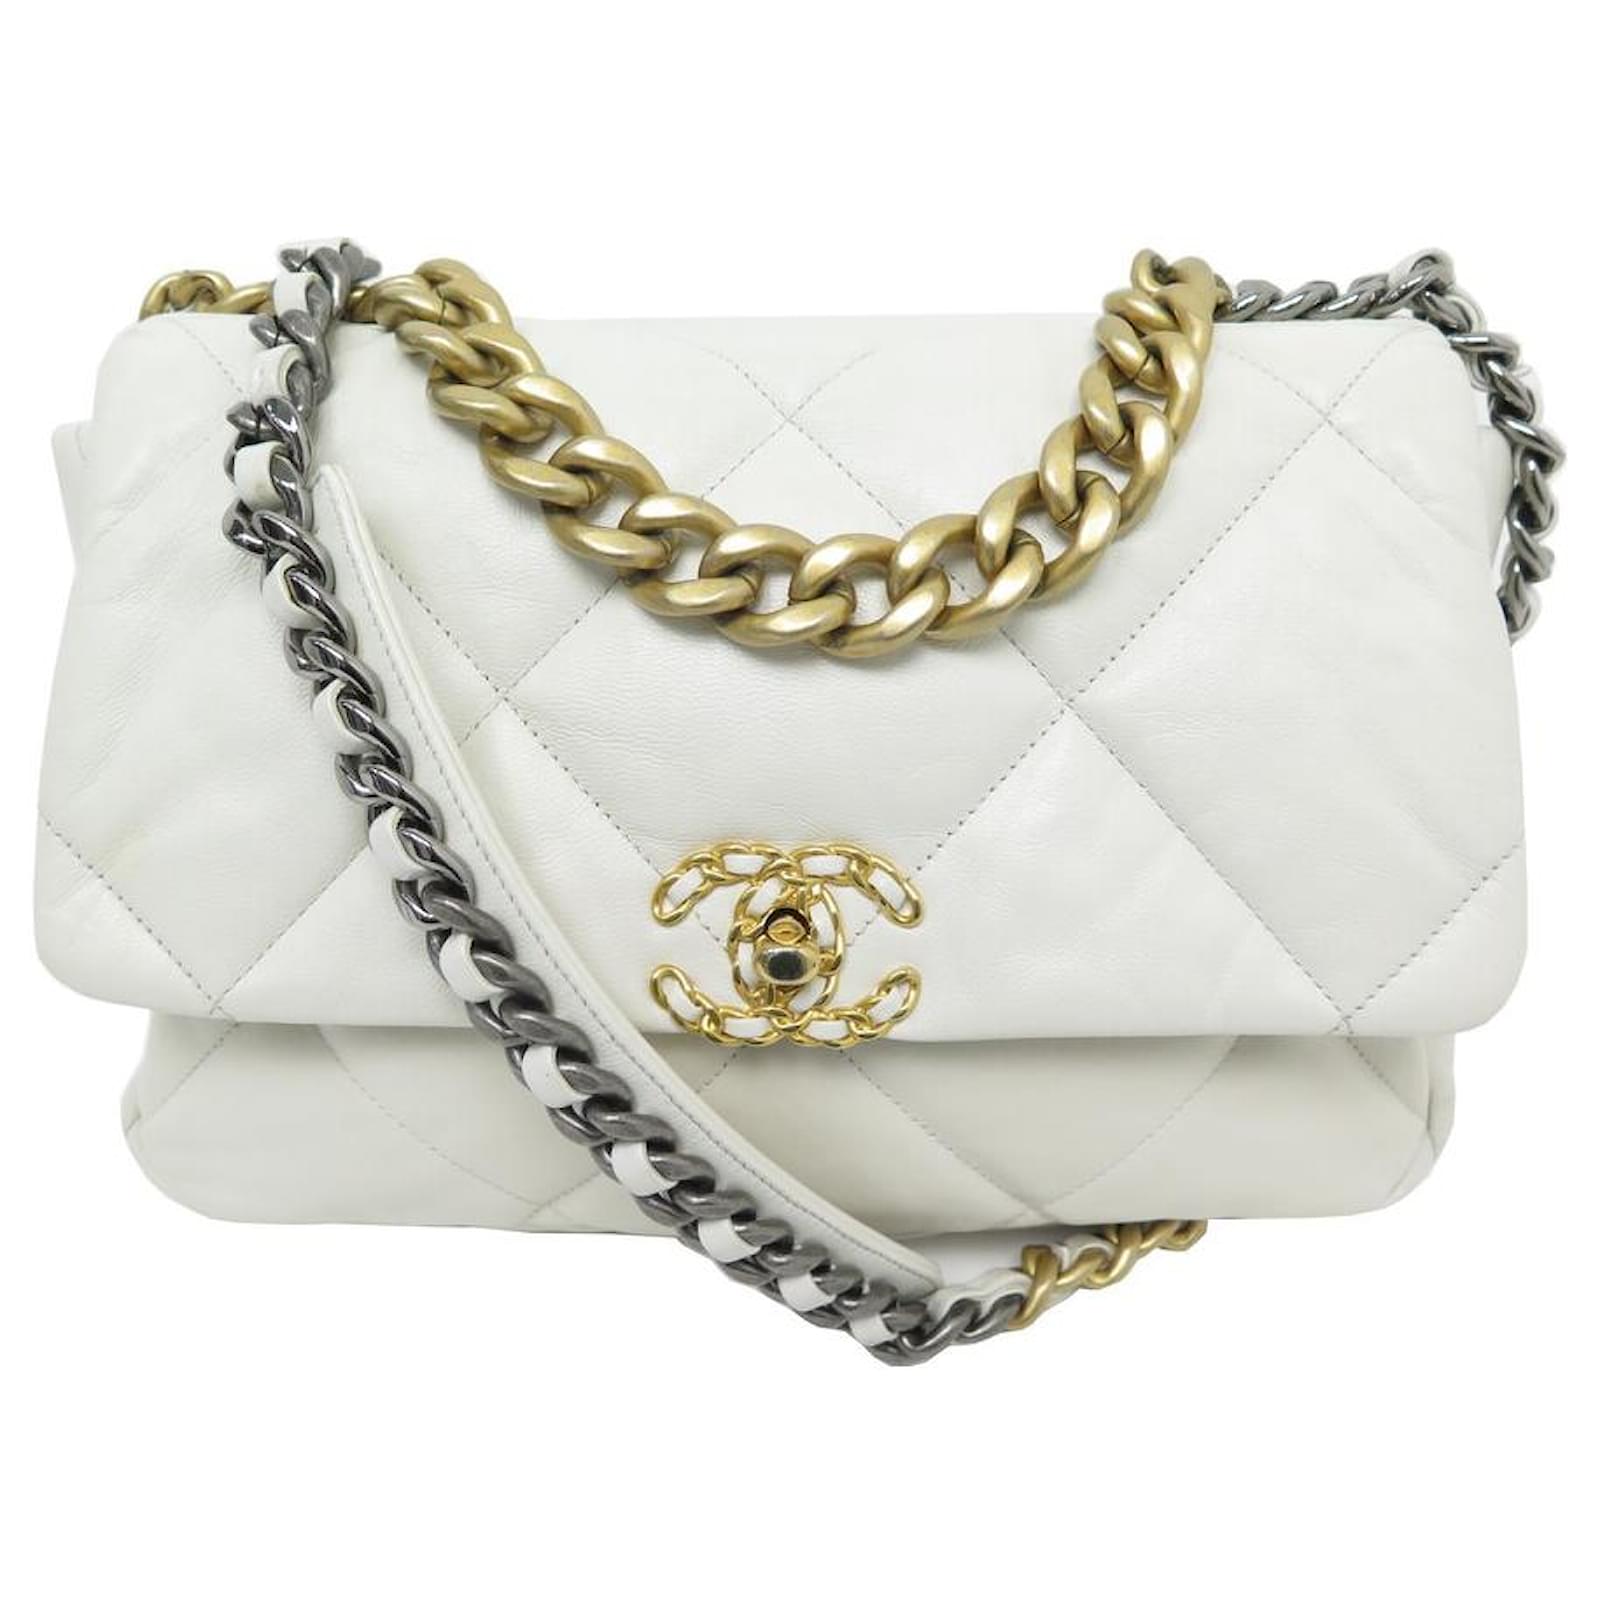 Chanel 19 Chanel handbag 19 LARGE WHITE QUILTED LEATHER WHITE